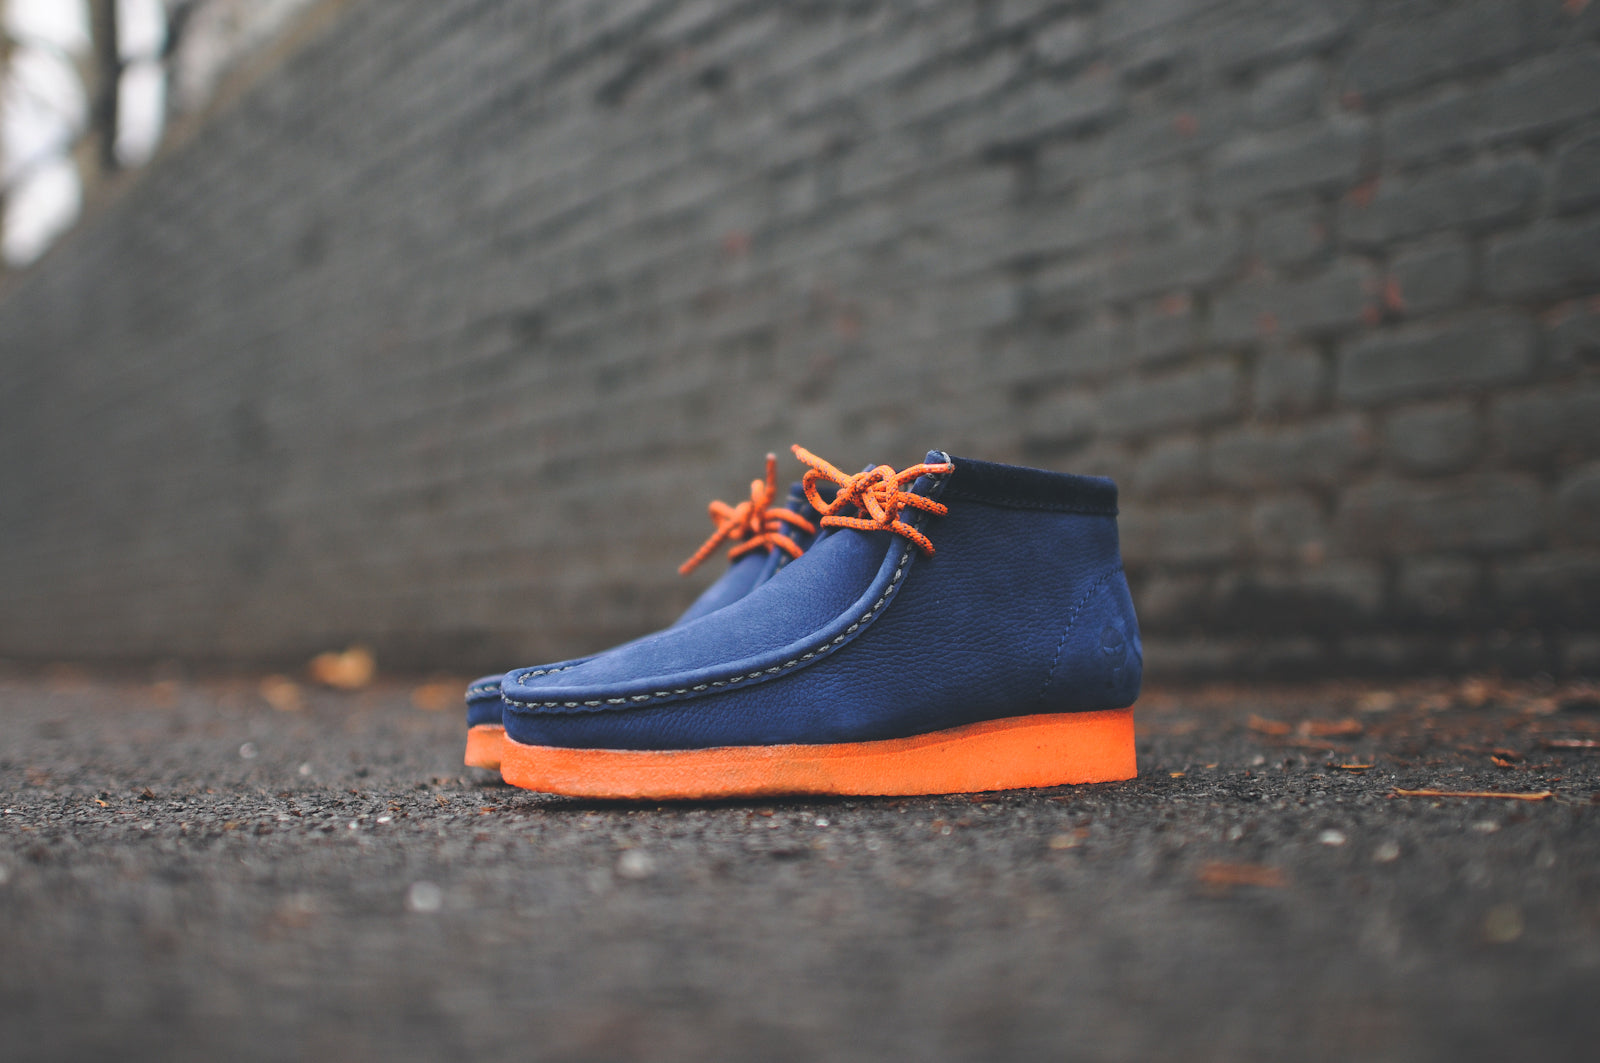 wallabees two tone